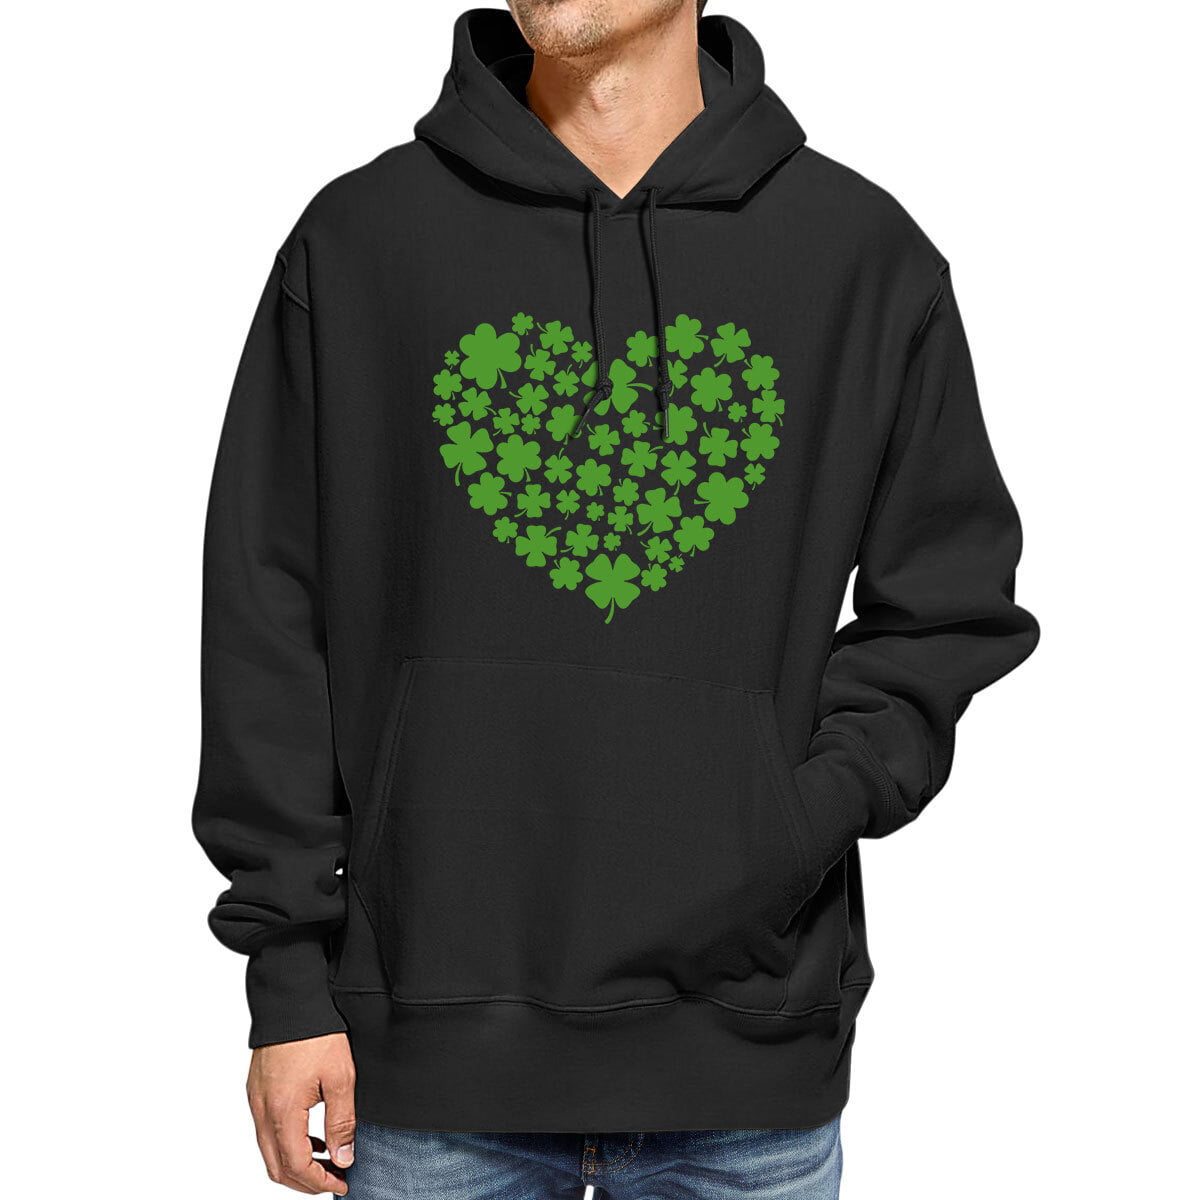 St Patrick's Day Hoodie for Women Teen Girls Lucky Charm Clover Pullover Hoodies 